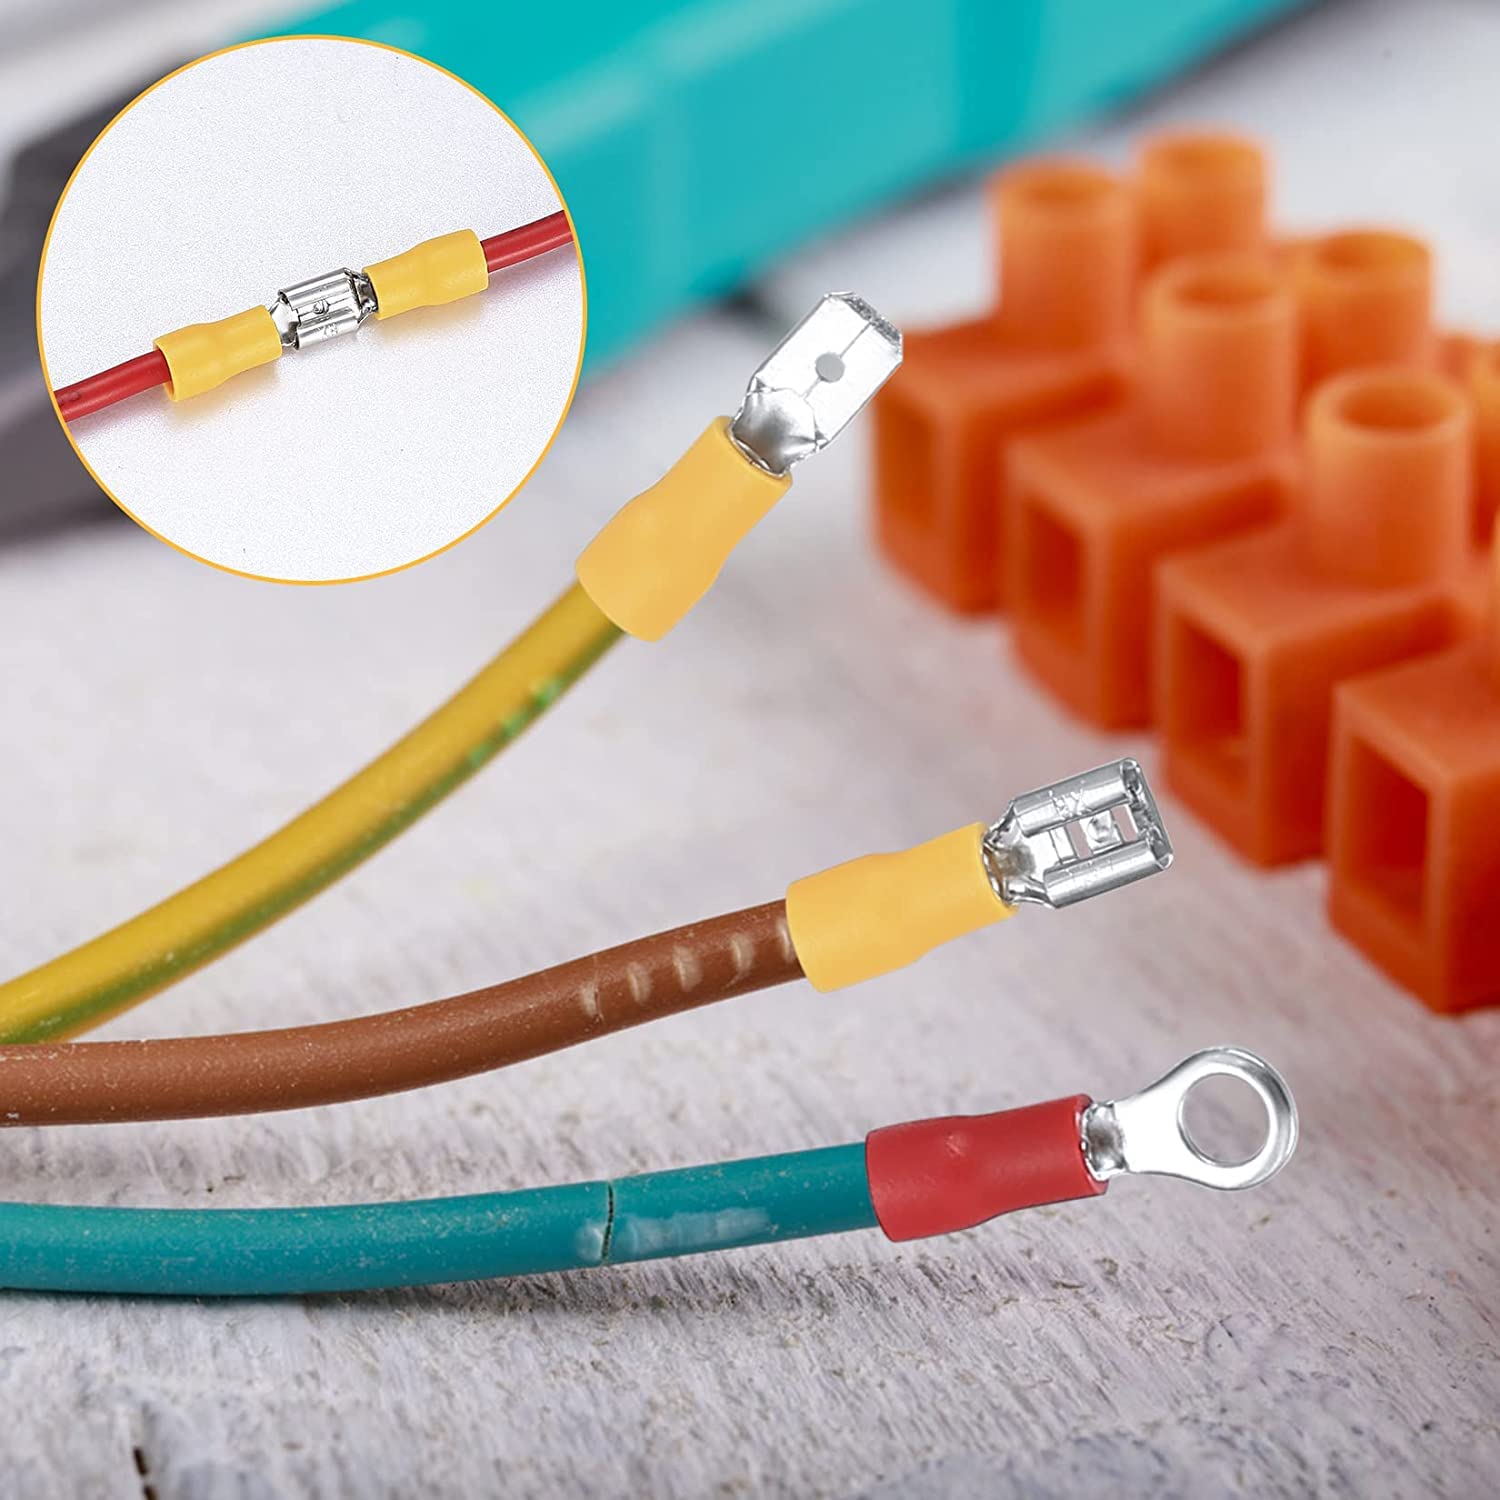 Insulated Cable Connector Electrical Wire Crimp Spade Butt Ring - enoughdream.com